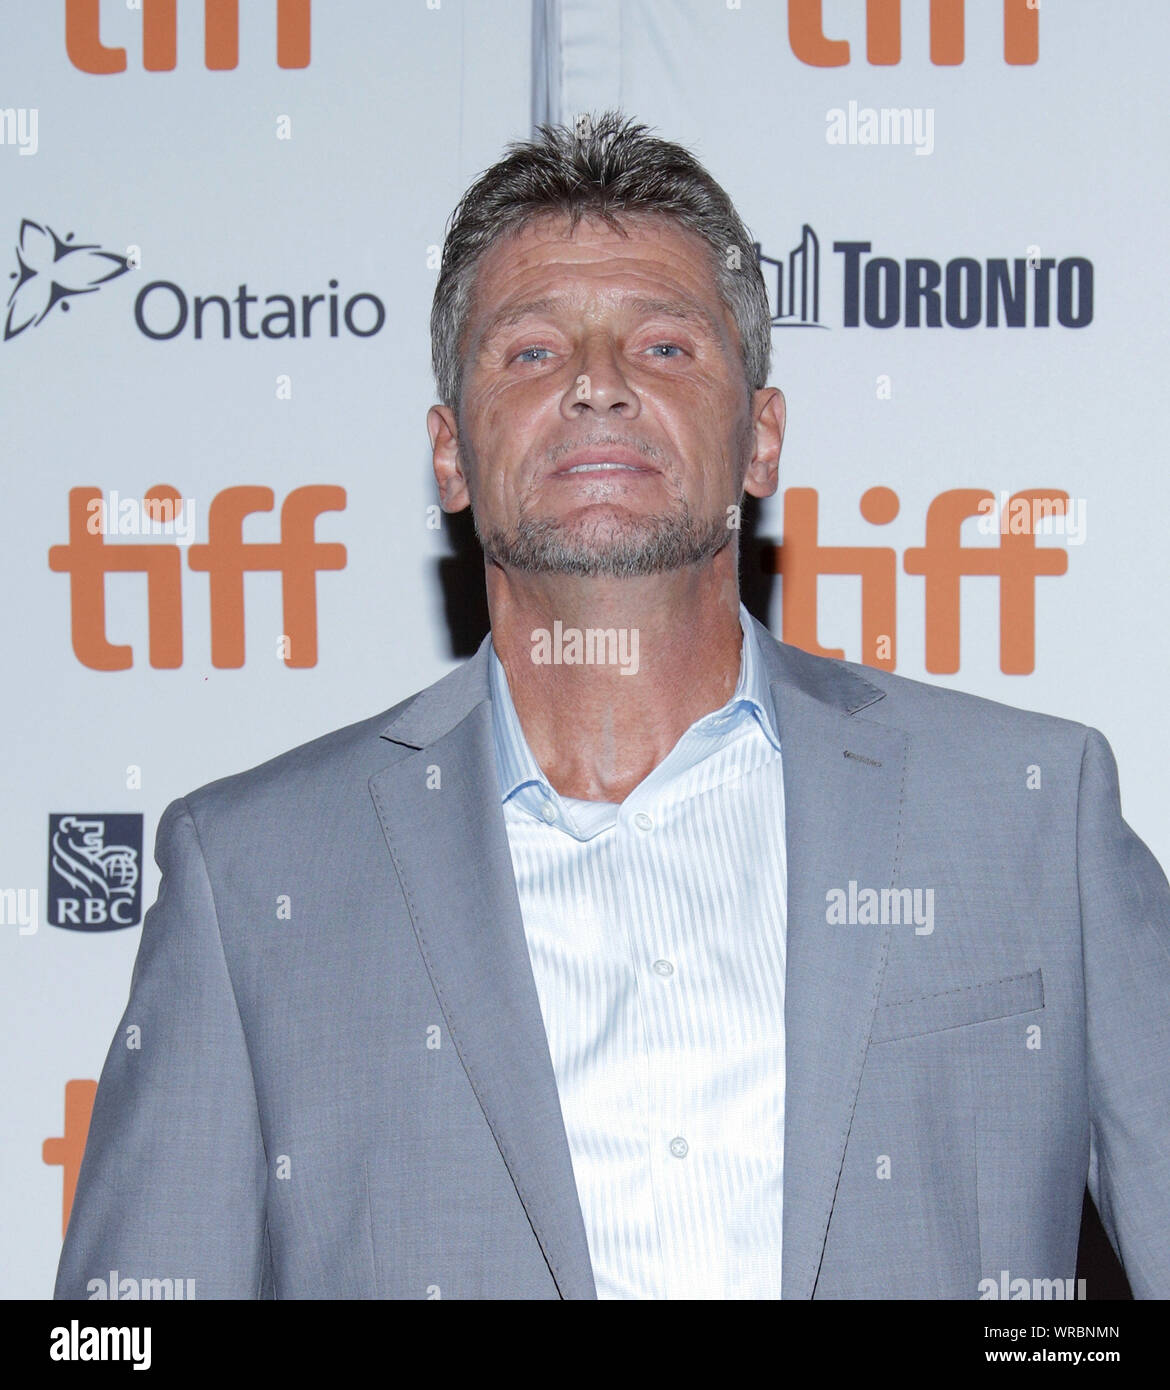 Toronto, Canada. 09th Sep, 2019. Keith Williams Richards attends the "Uncut Gems"premiere during the 2019 Toronto International Film Festival at Princess of Wales Theatre on September 09, 2019 in Toronto, Canada. Photo: PICJER/imageSPACE/MediaPunch Credit: MediaPunch Inc/Alamy Live News  Stock Photo